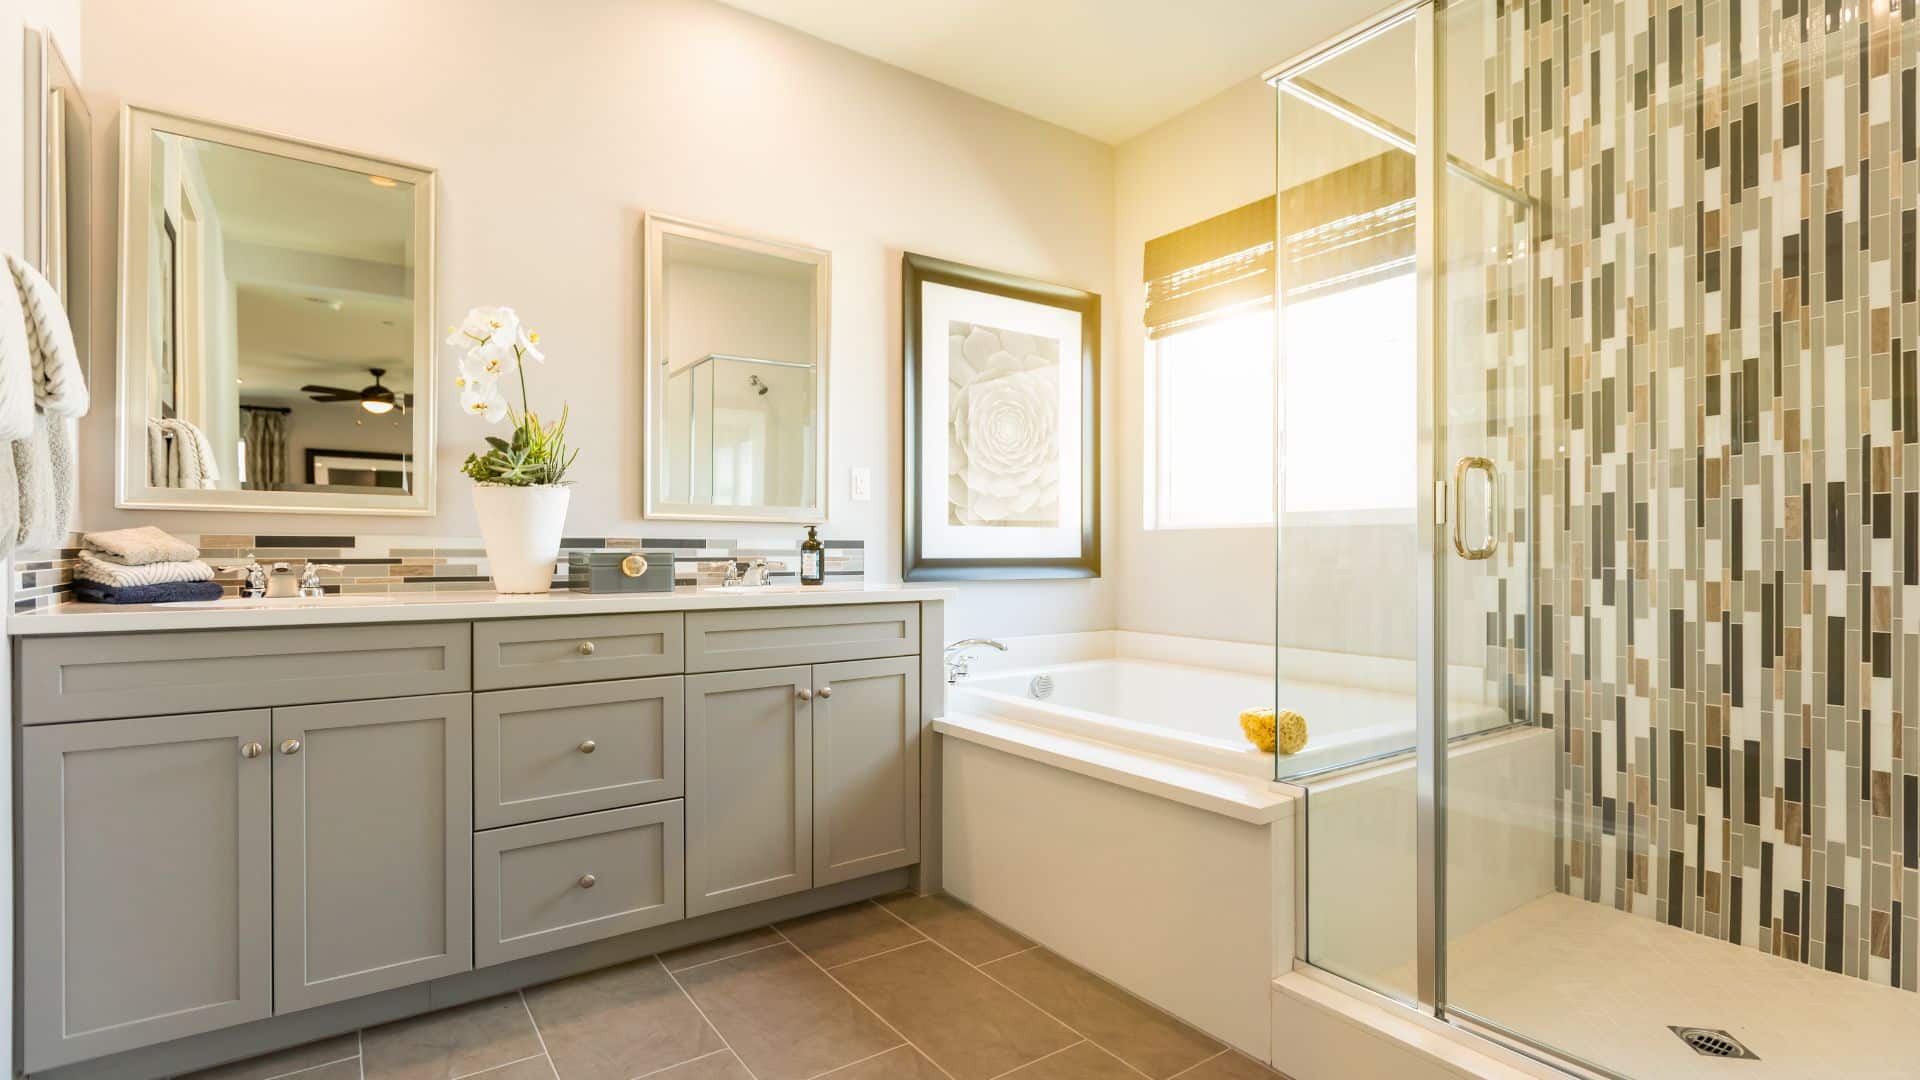 Spacious bathroom with gray shaker vanity, tub and shower